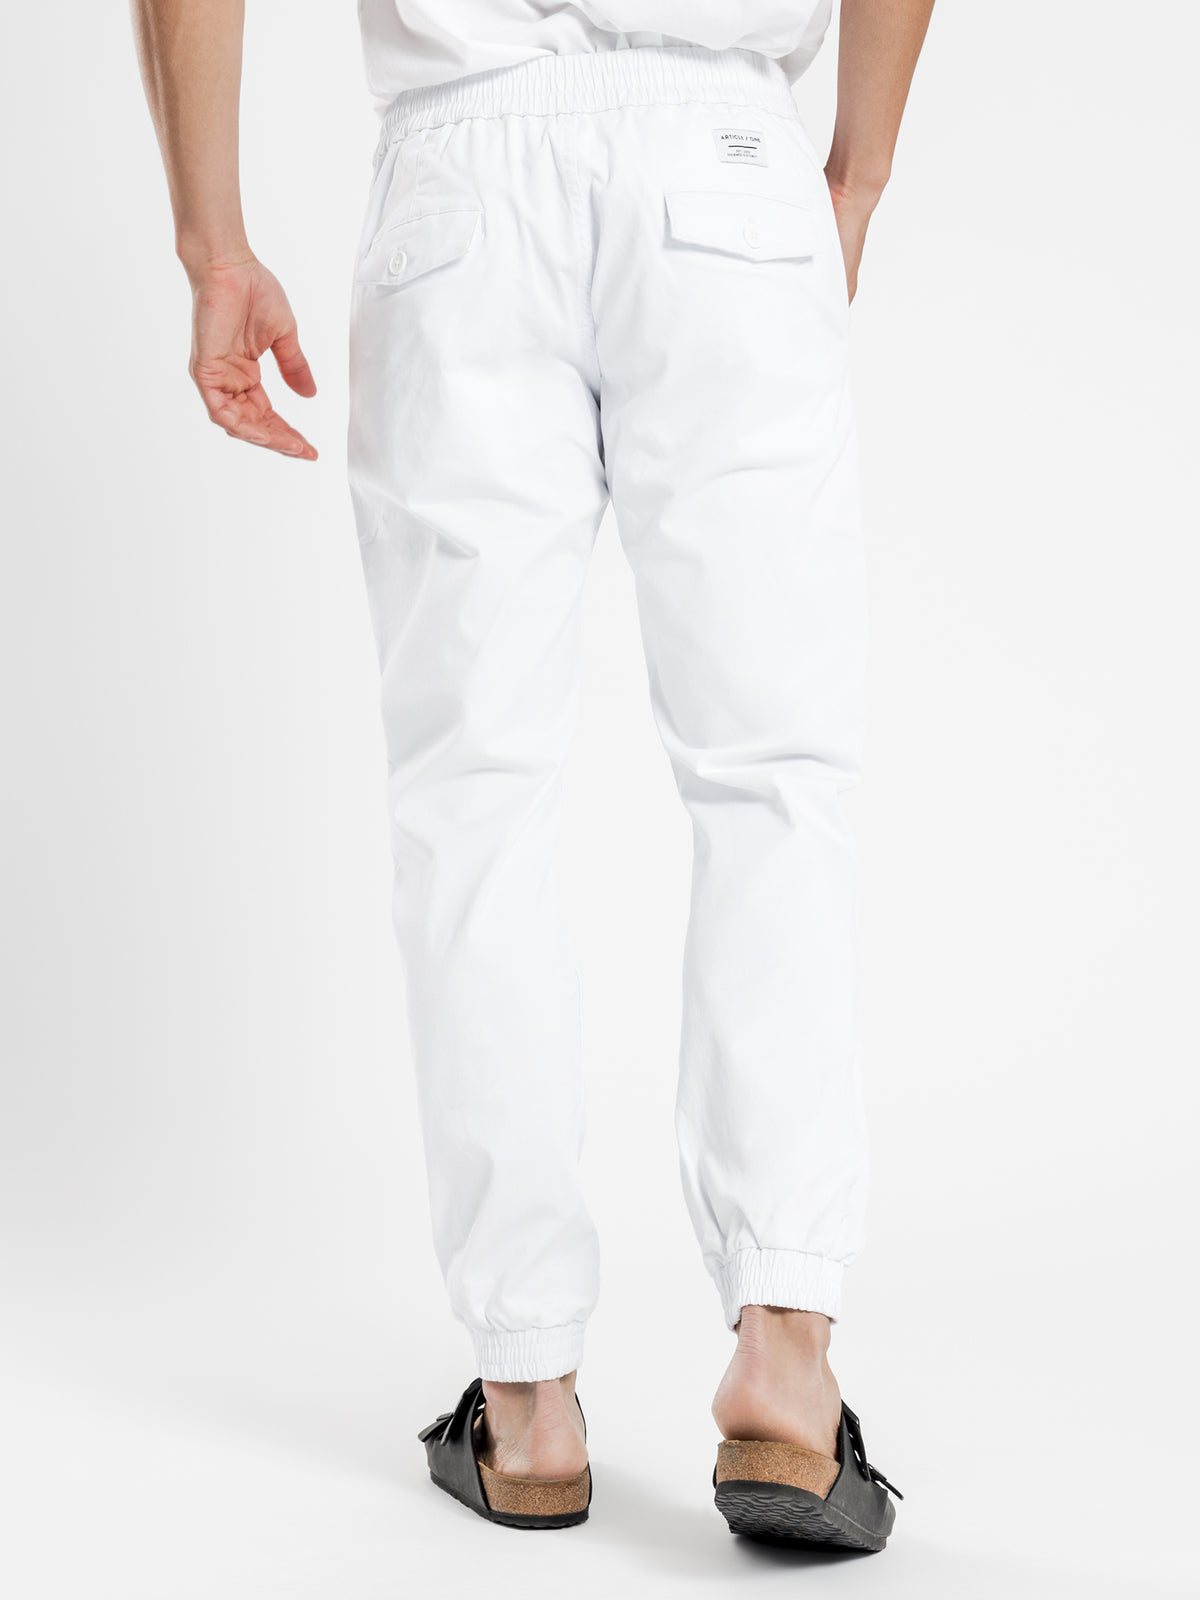 Boden Jogger Pants in White